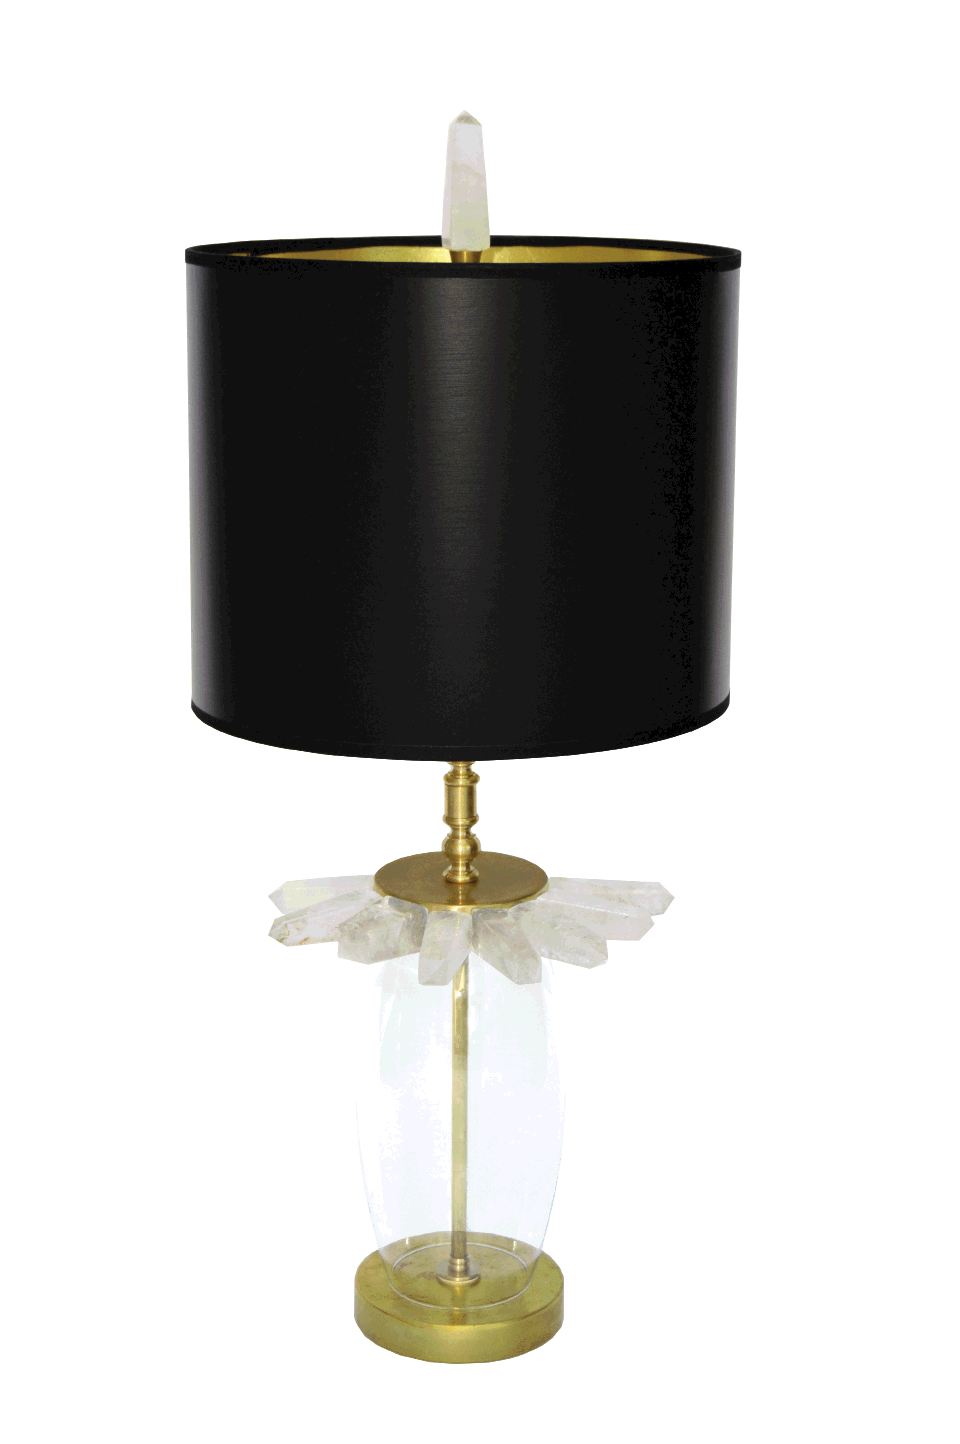 The Francesca table lamp by Ro Sham Beaux